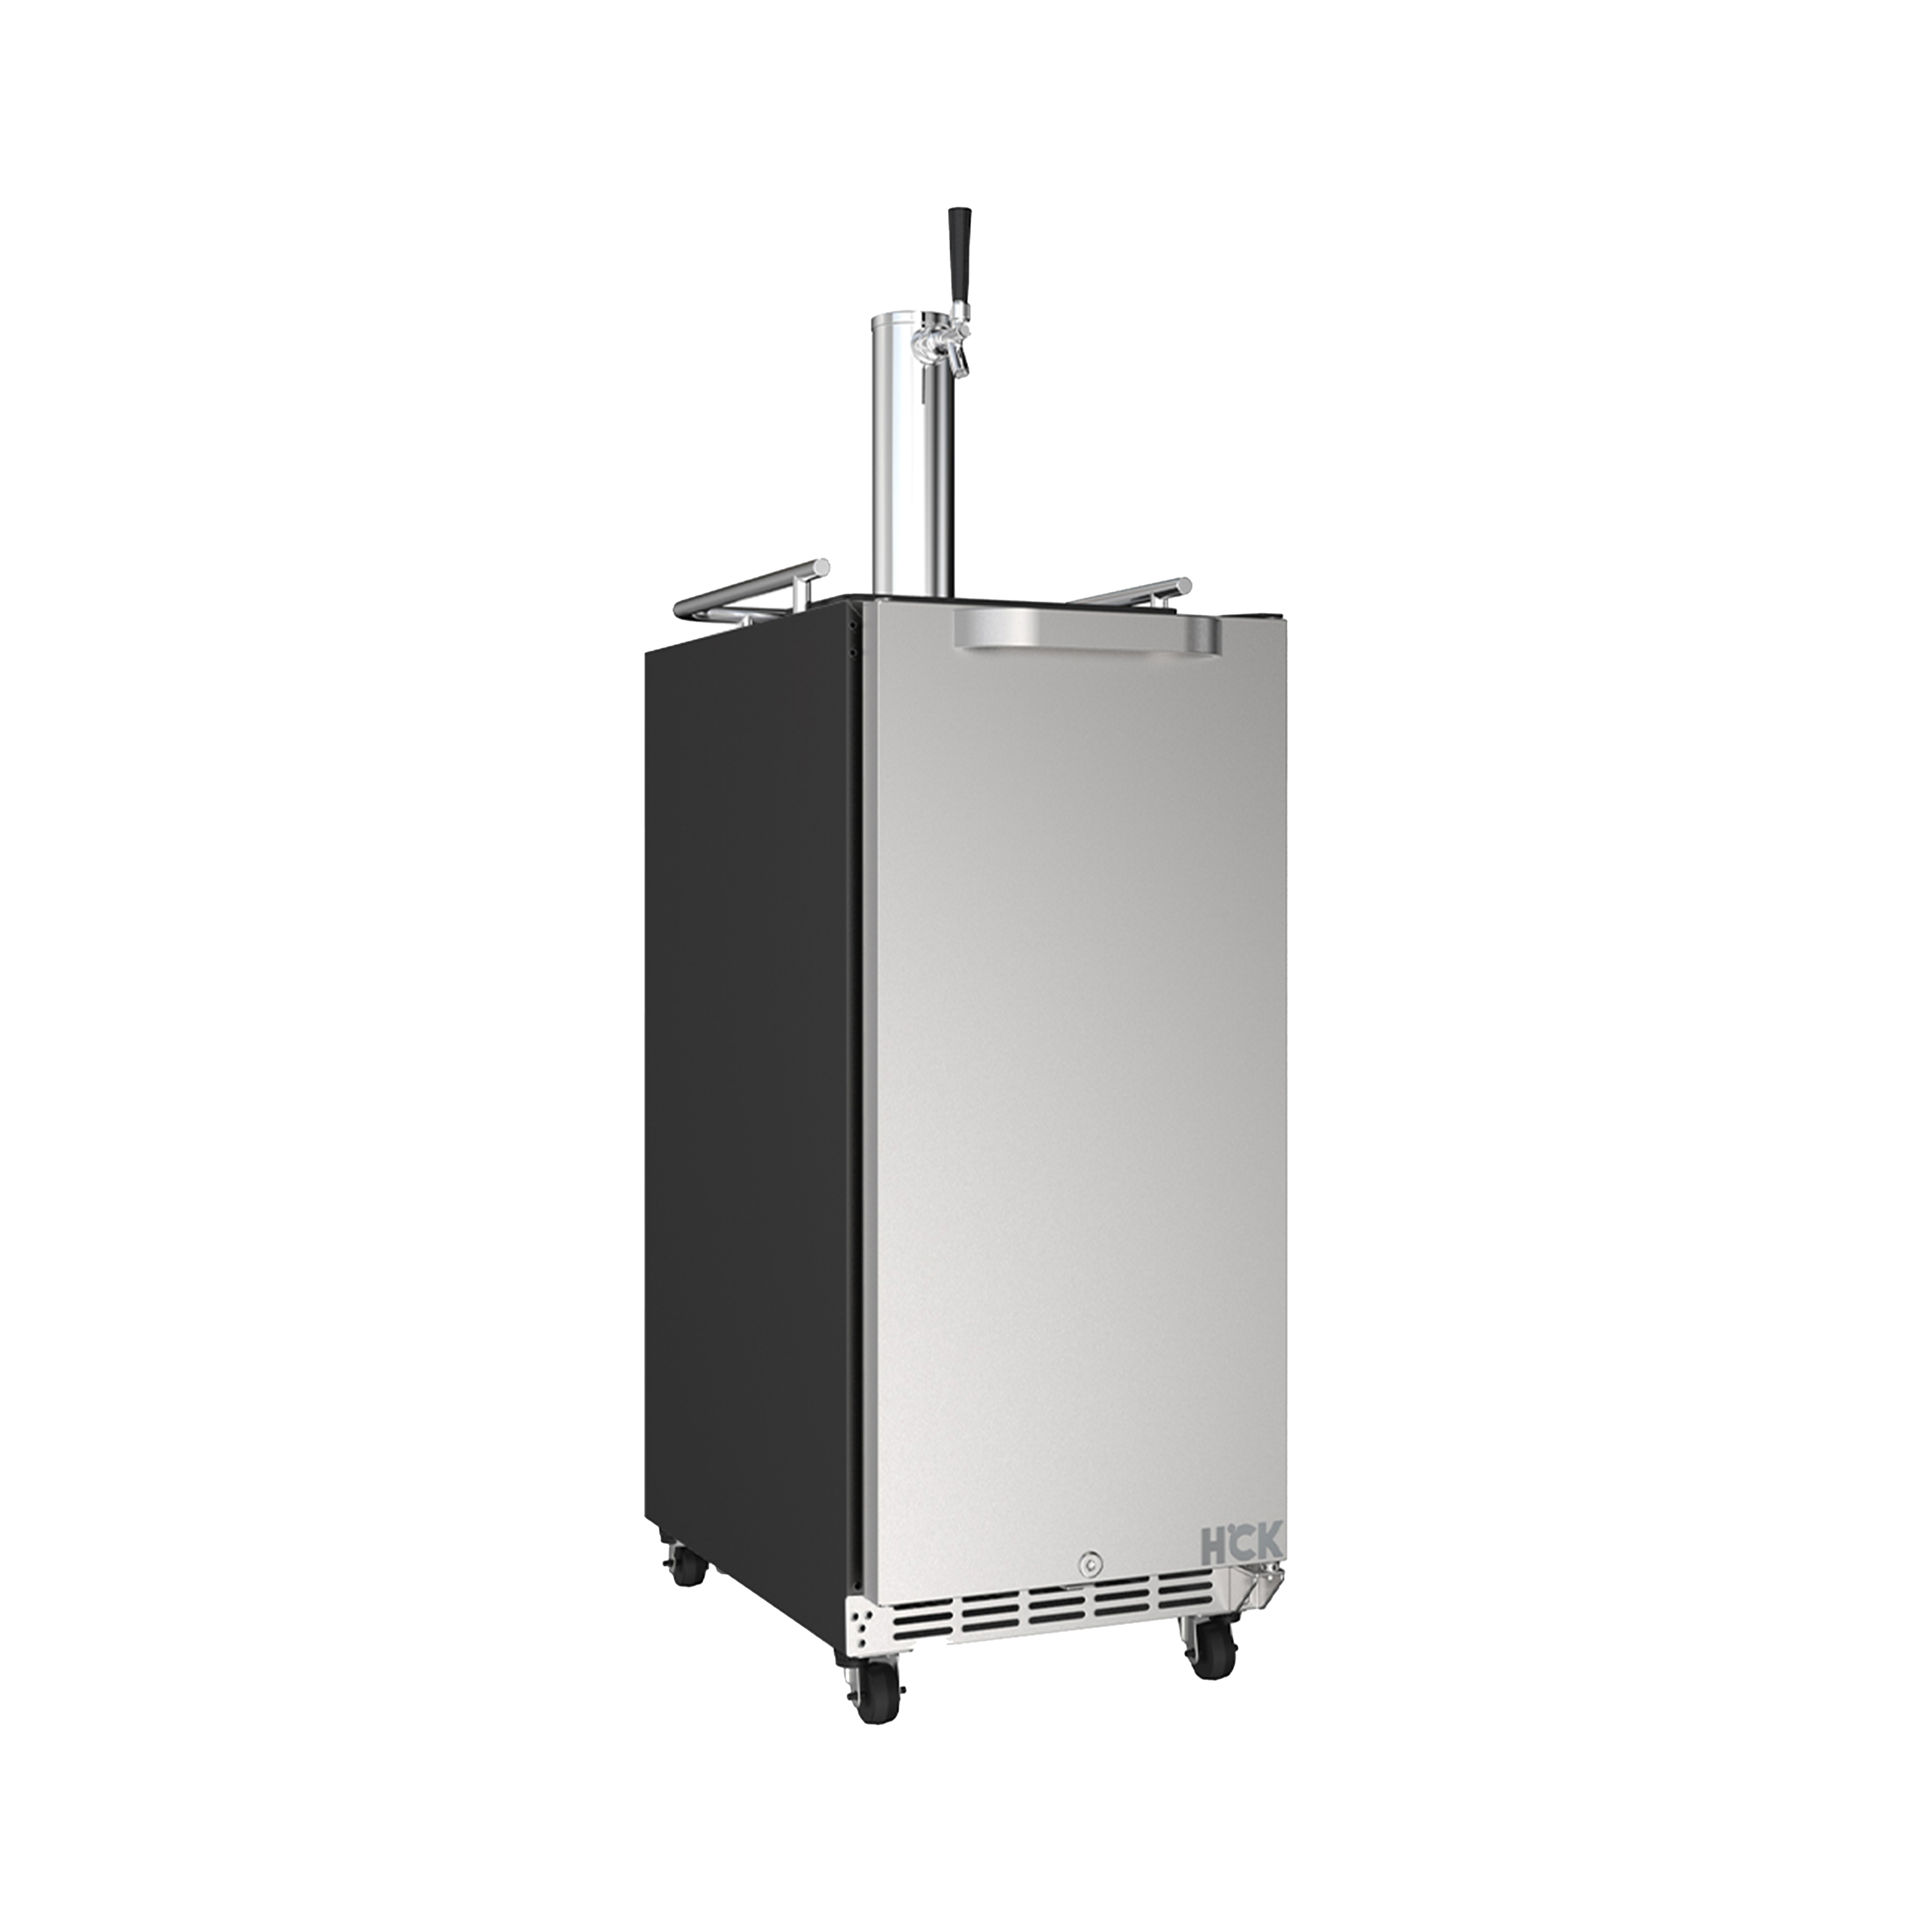 Side view of a Black 3.2 Cu Ft Outdoor Refrigerator Kegerator 96 cans